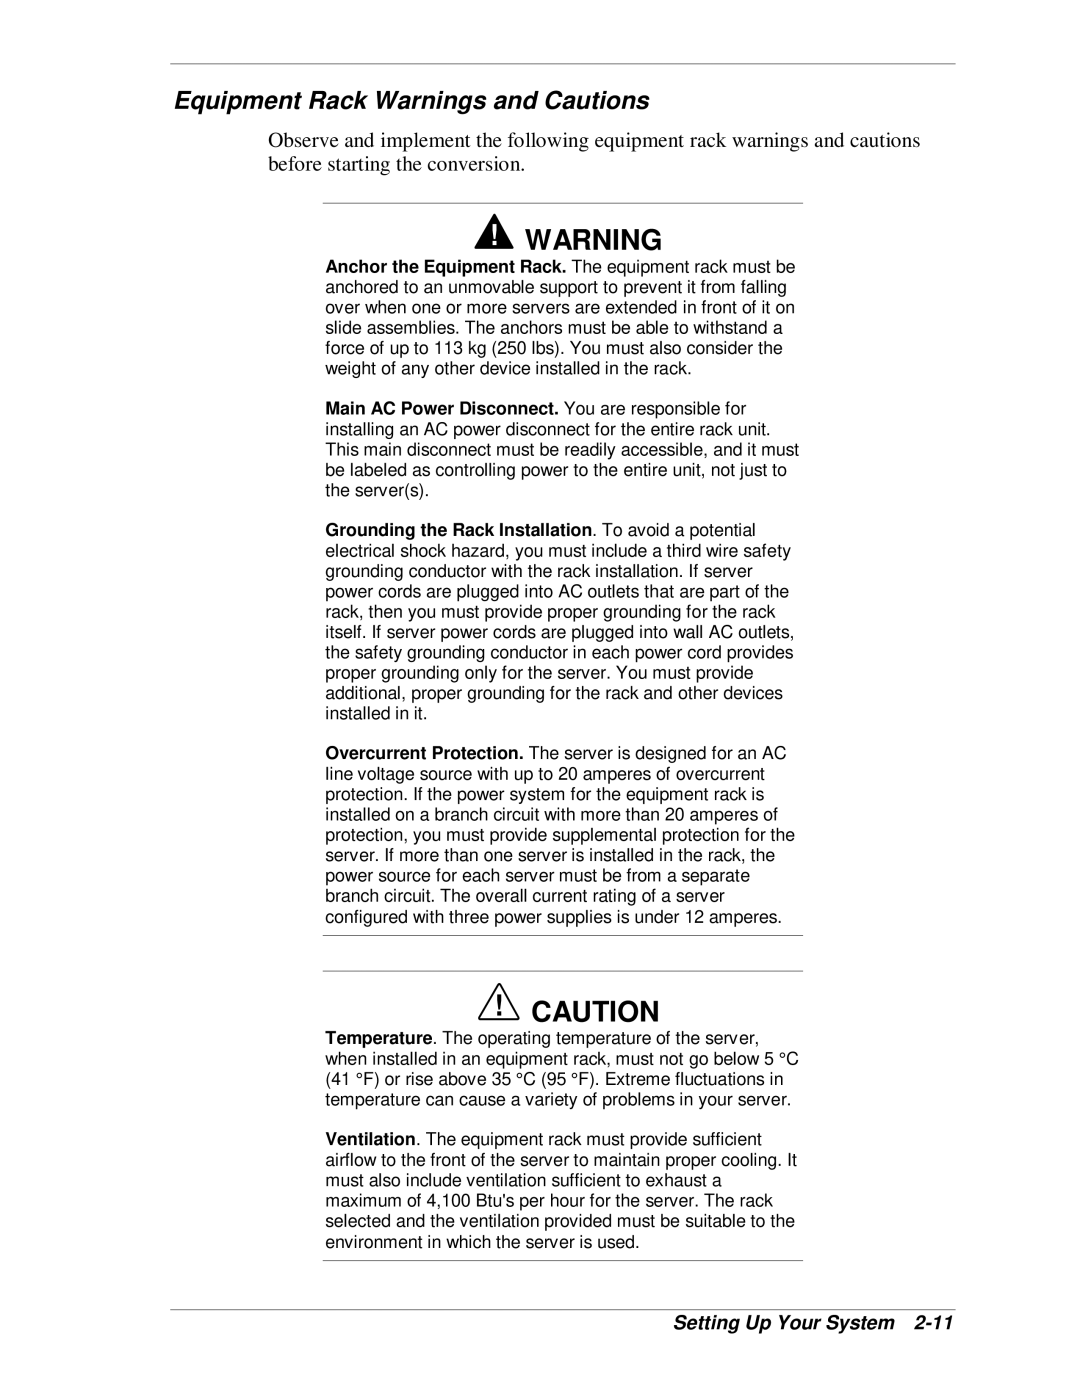 NEC MH4500 manual Equipment Rack Warnings and Cautions, Setting Up Your System 